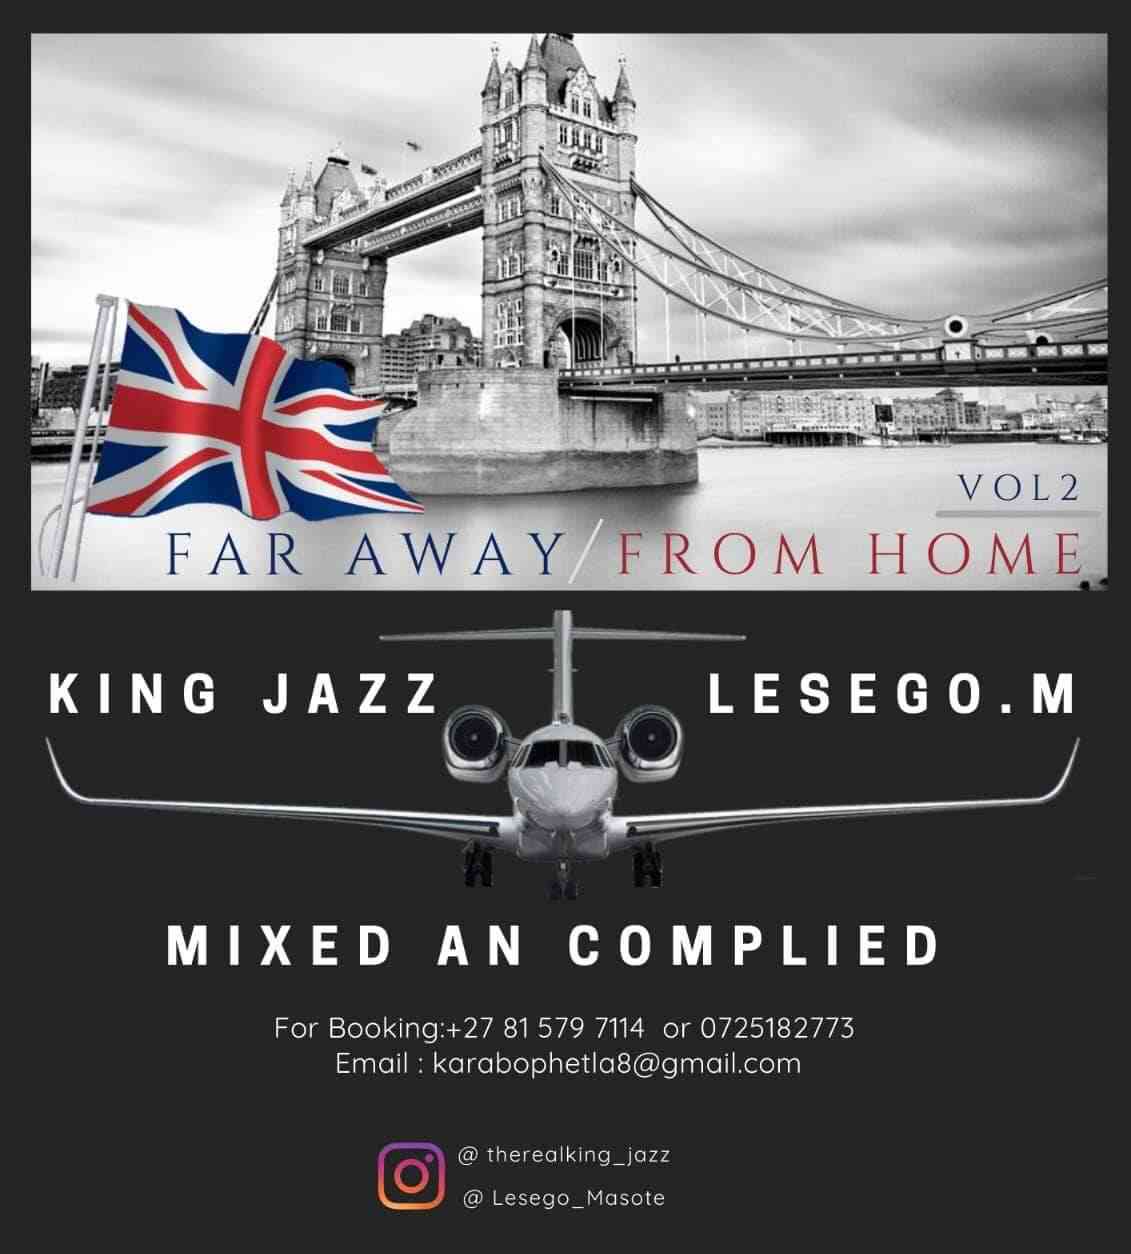 King Jazz & Lesego M - Far Away From Home Vol. 2